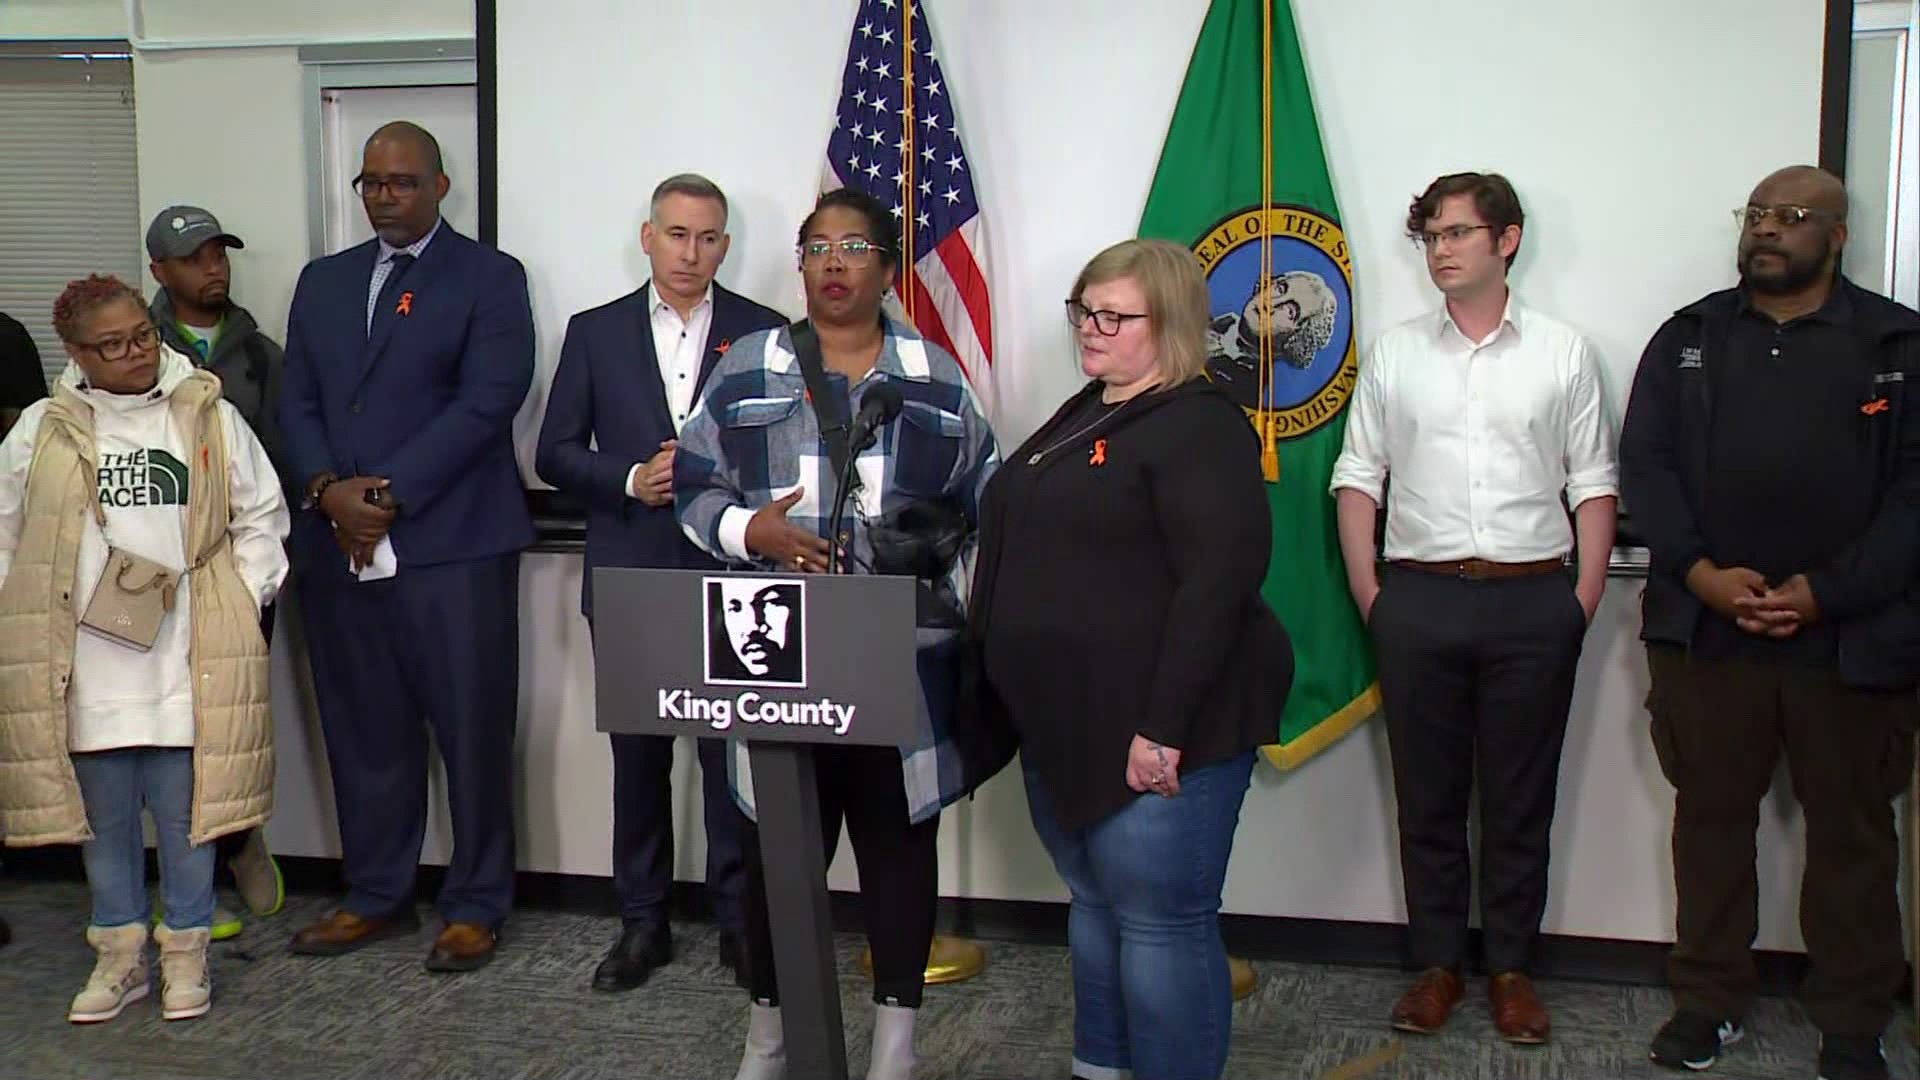 King County is forming its own Regional Office of Gun Violence Prevention as Seattle continues to deal with a record homicide pace.